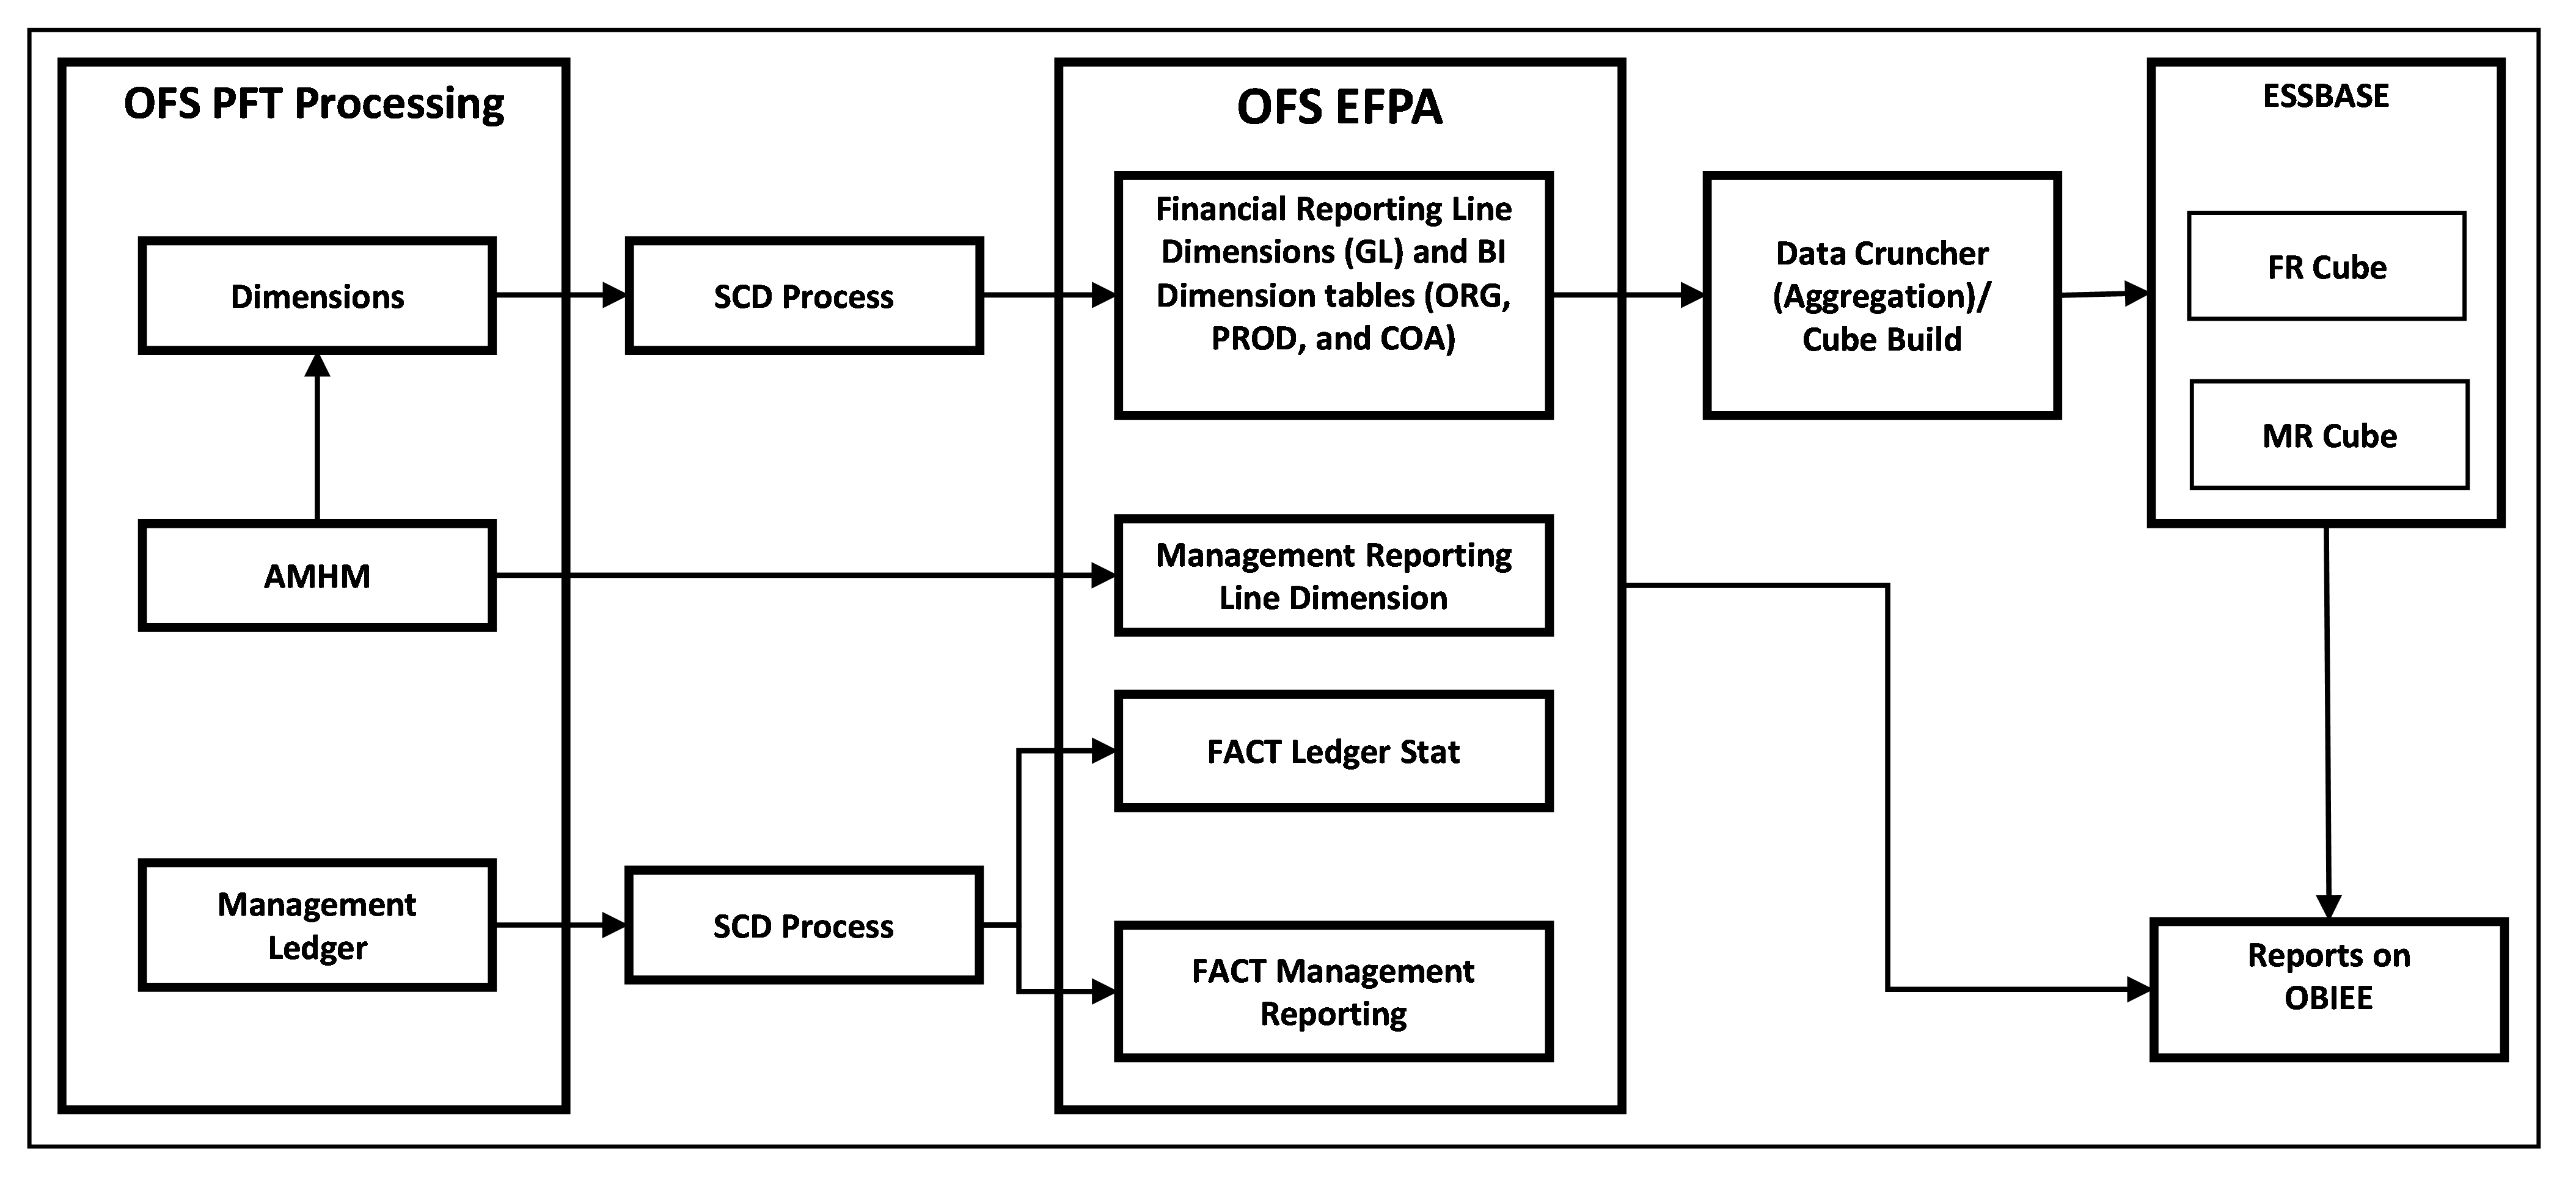 This illustration describes the data flow between OFS Profitability Management application and OFS EFPA application.